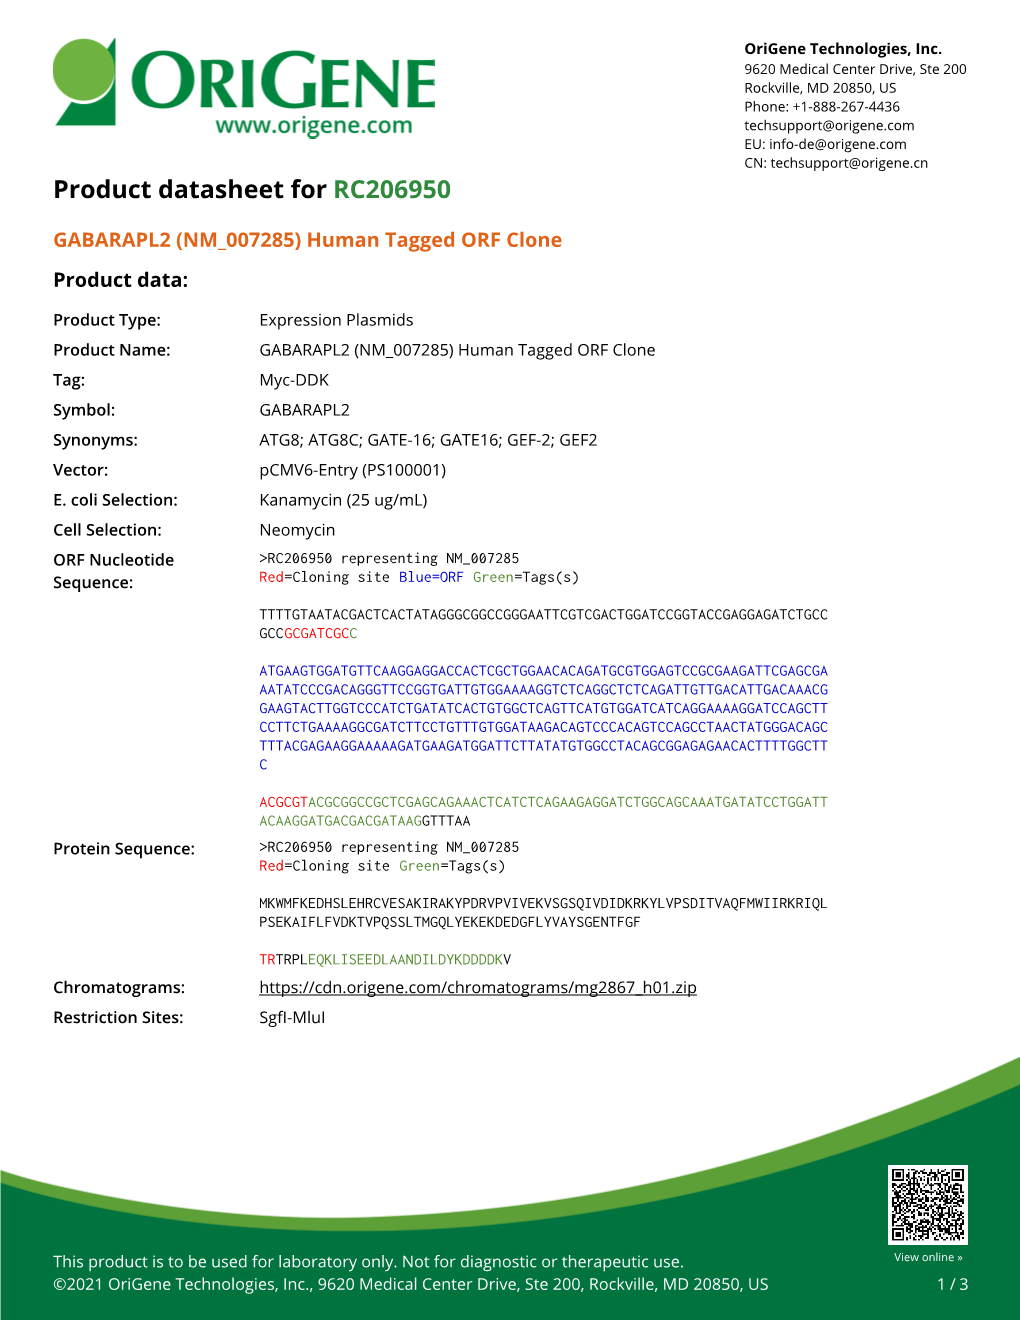 GABARAPL2 (NM 007285) Human Tagged ORF Clone Product Data